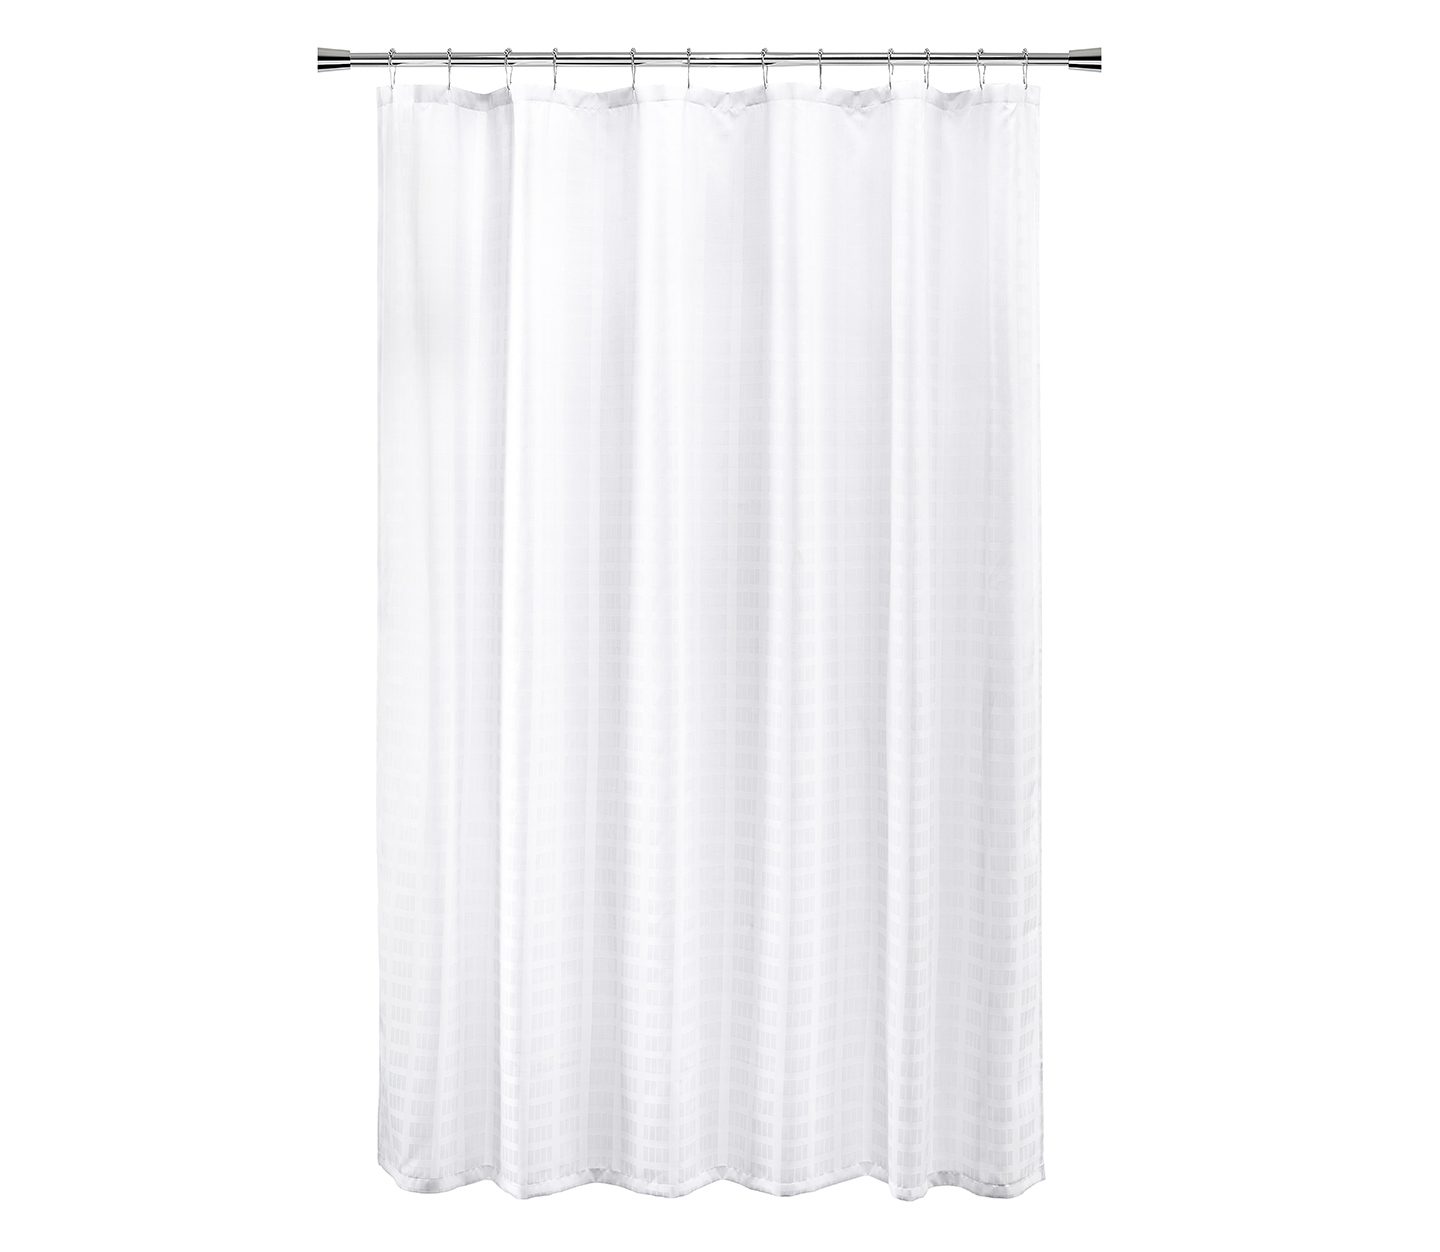 Hooked Shower Curtains